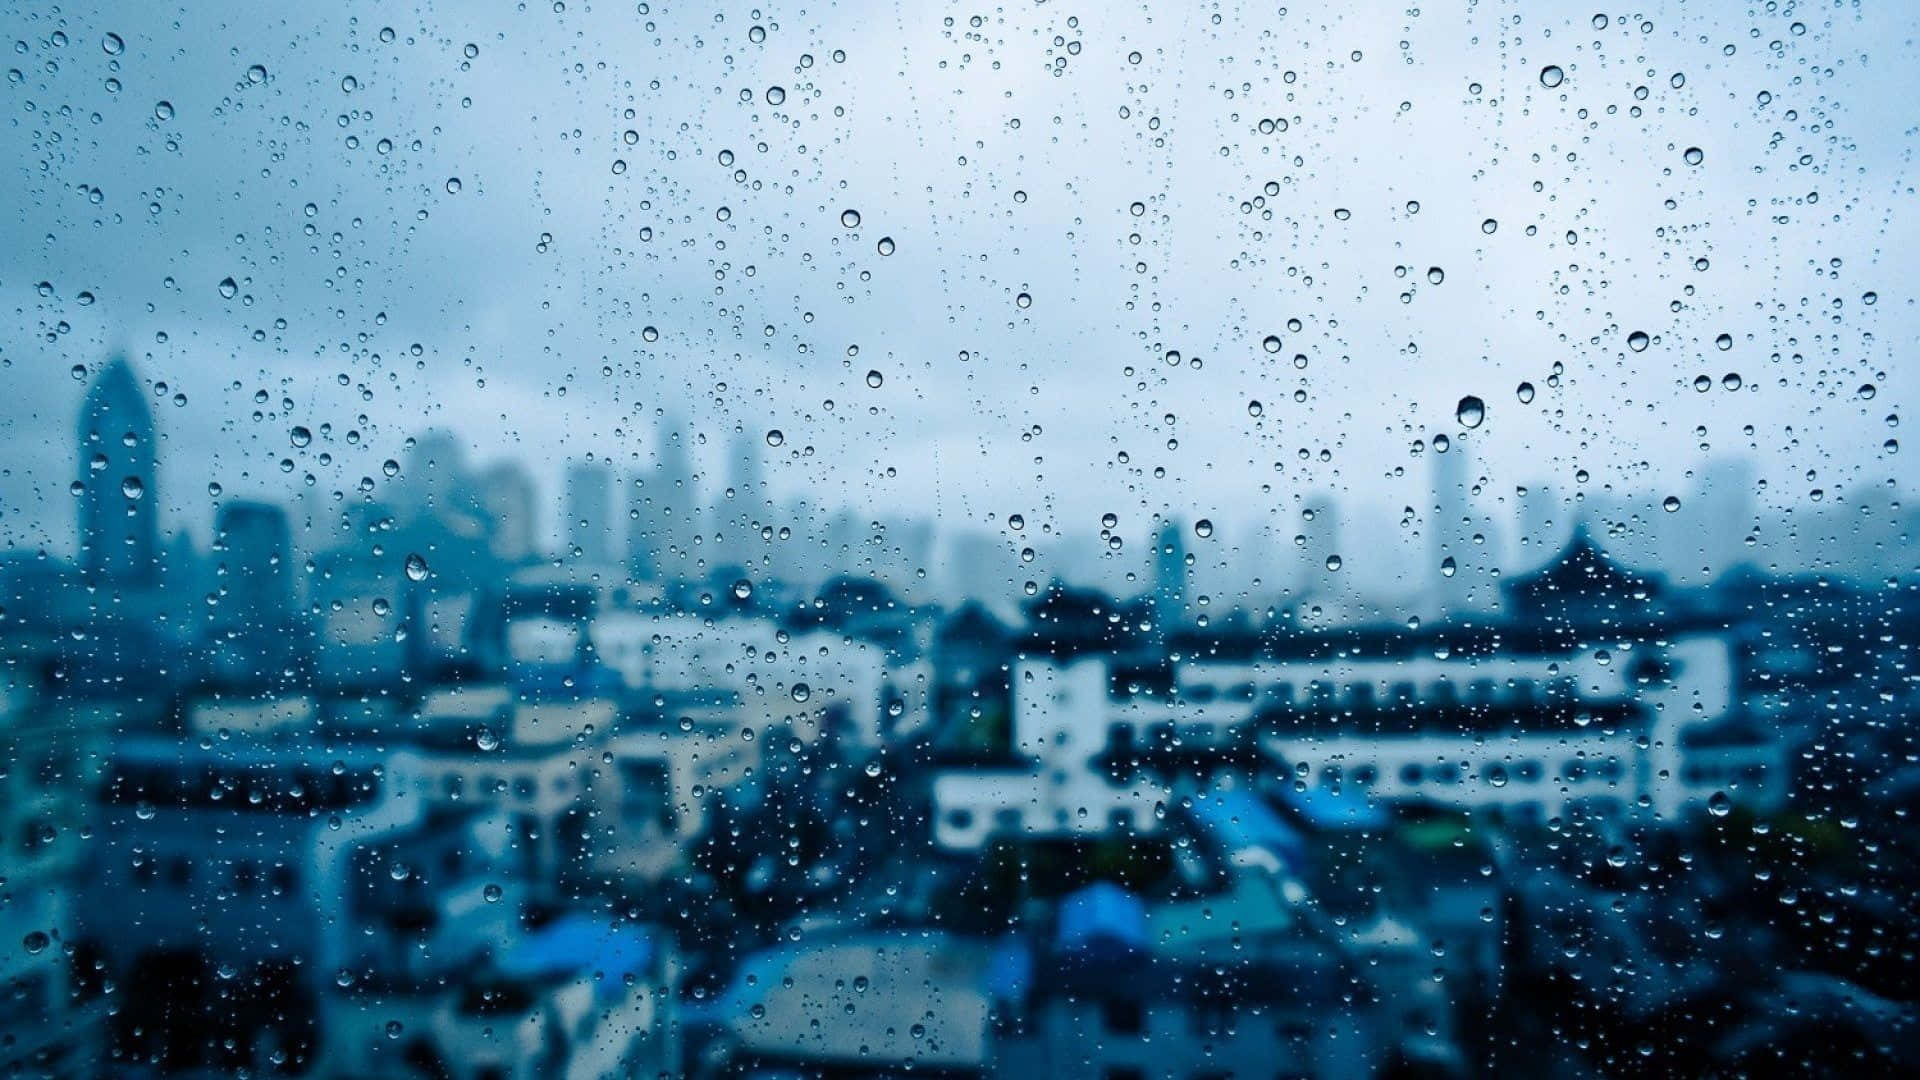 Animated Rain Wallpapers For Desktop 67 images